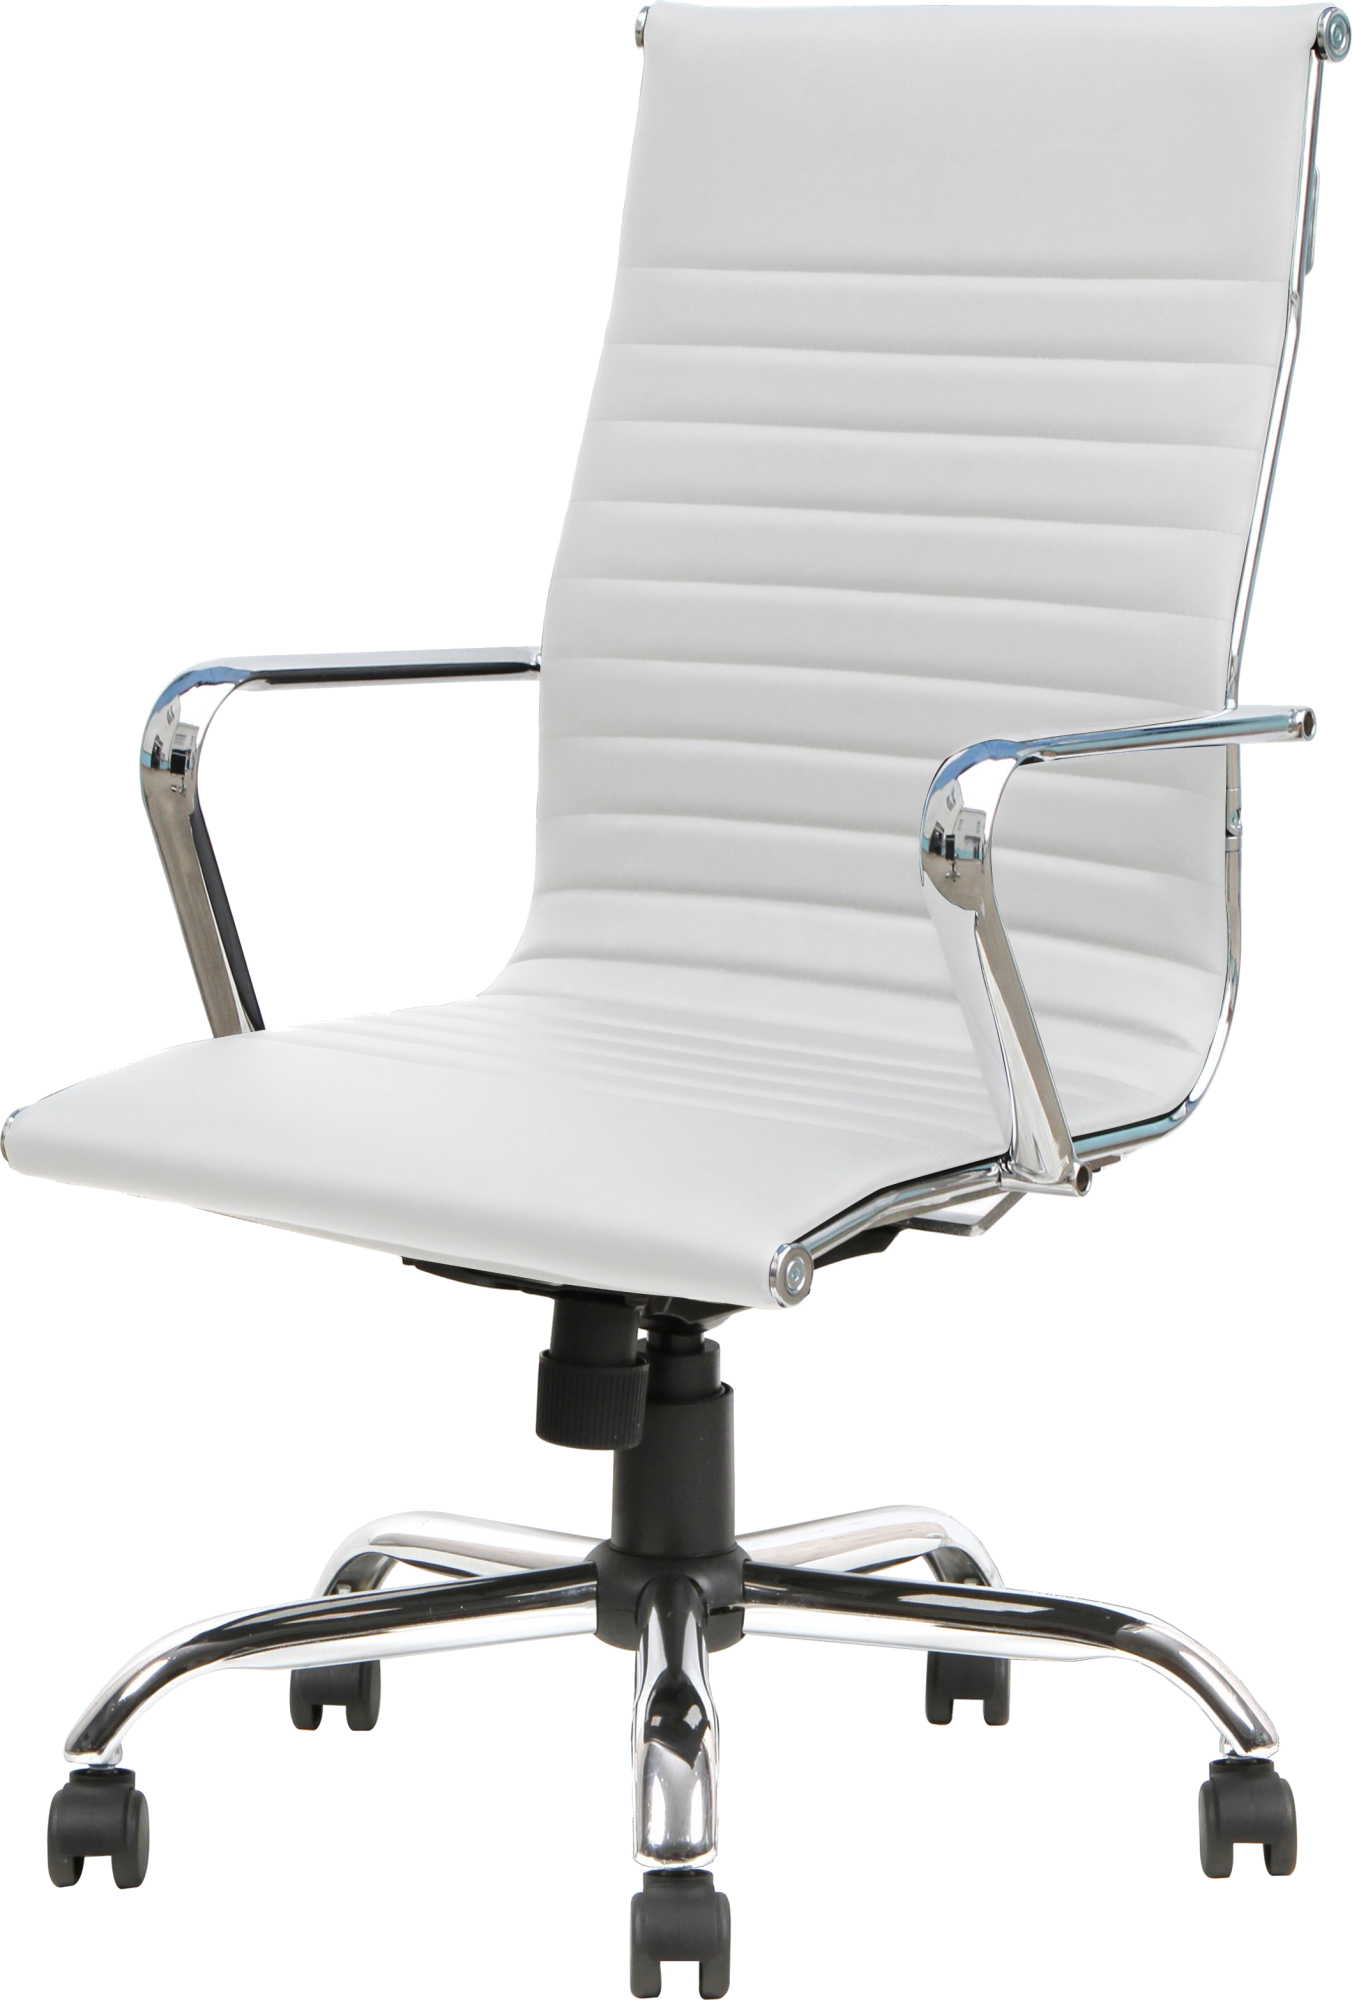 Custom Upholstery - Office Chair (1352x2000), Png Download